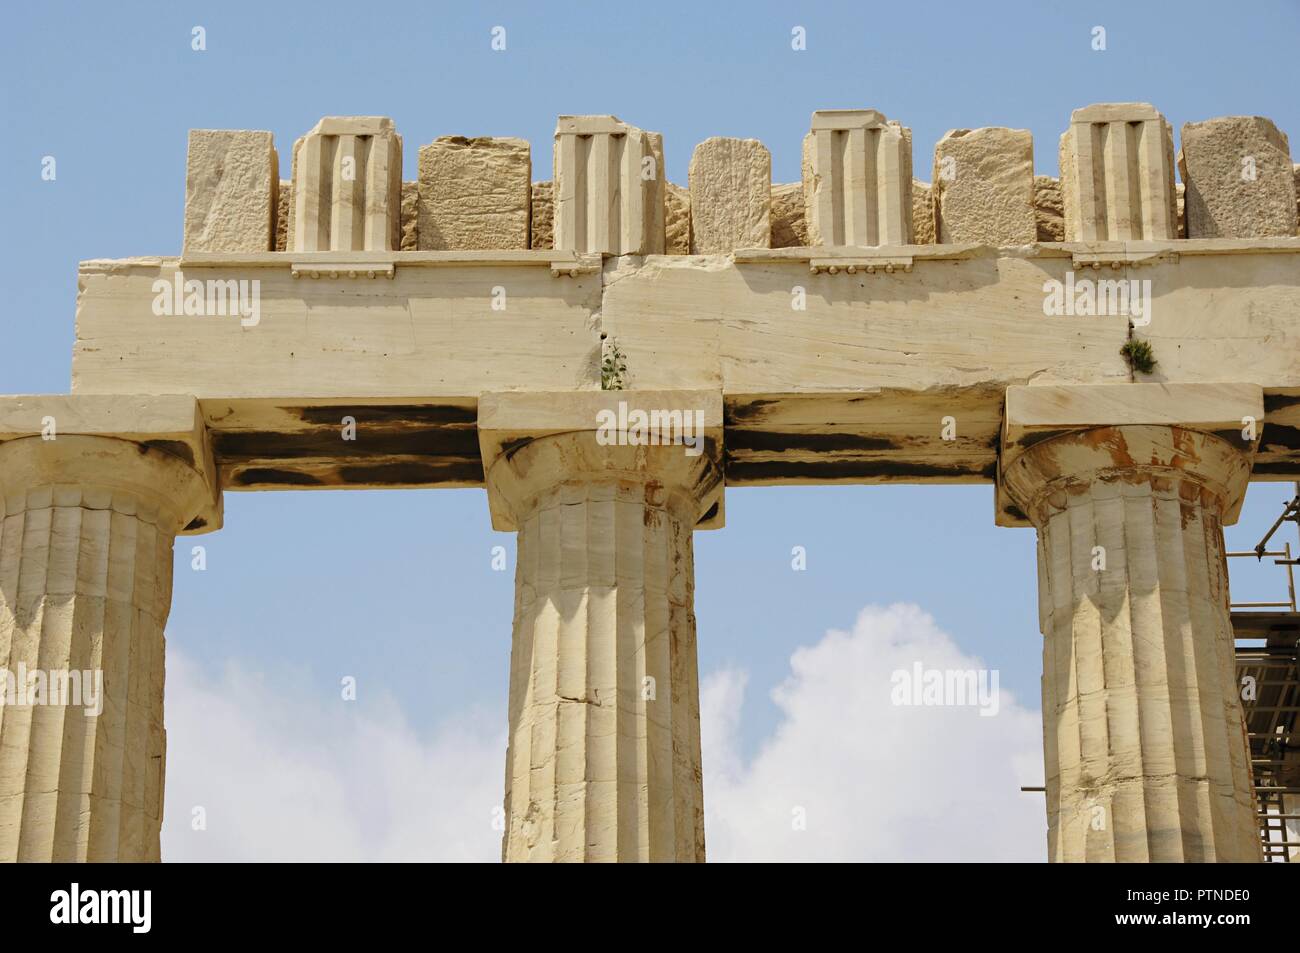 Greece. Athens. Acropolis. Parthenon. Classical temple dedicated to Athena. 447 BC-432 BC. Doric order. Architects: Iktinos and Callicrates. Ssculptor Phidias. Architectural detail. Pediment, entablature with frieze, triglyph, metope, architrave, columns and capital (abacus, echinus). Stock Photo